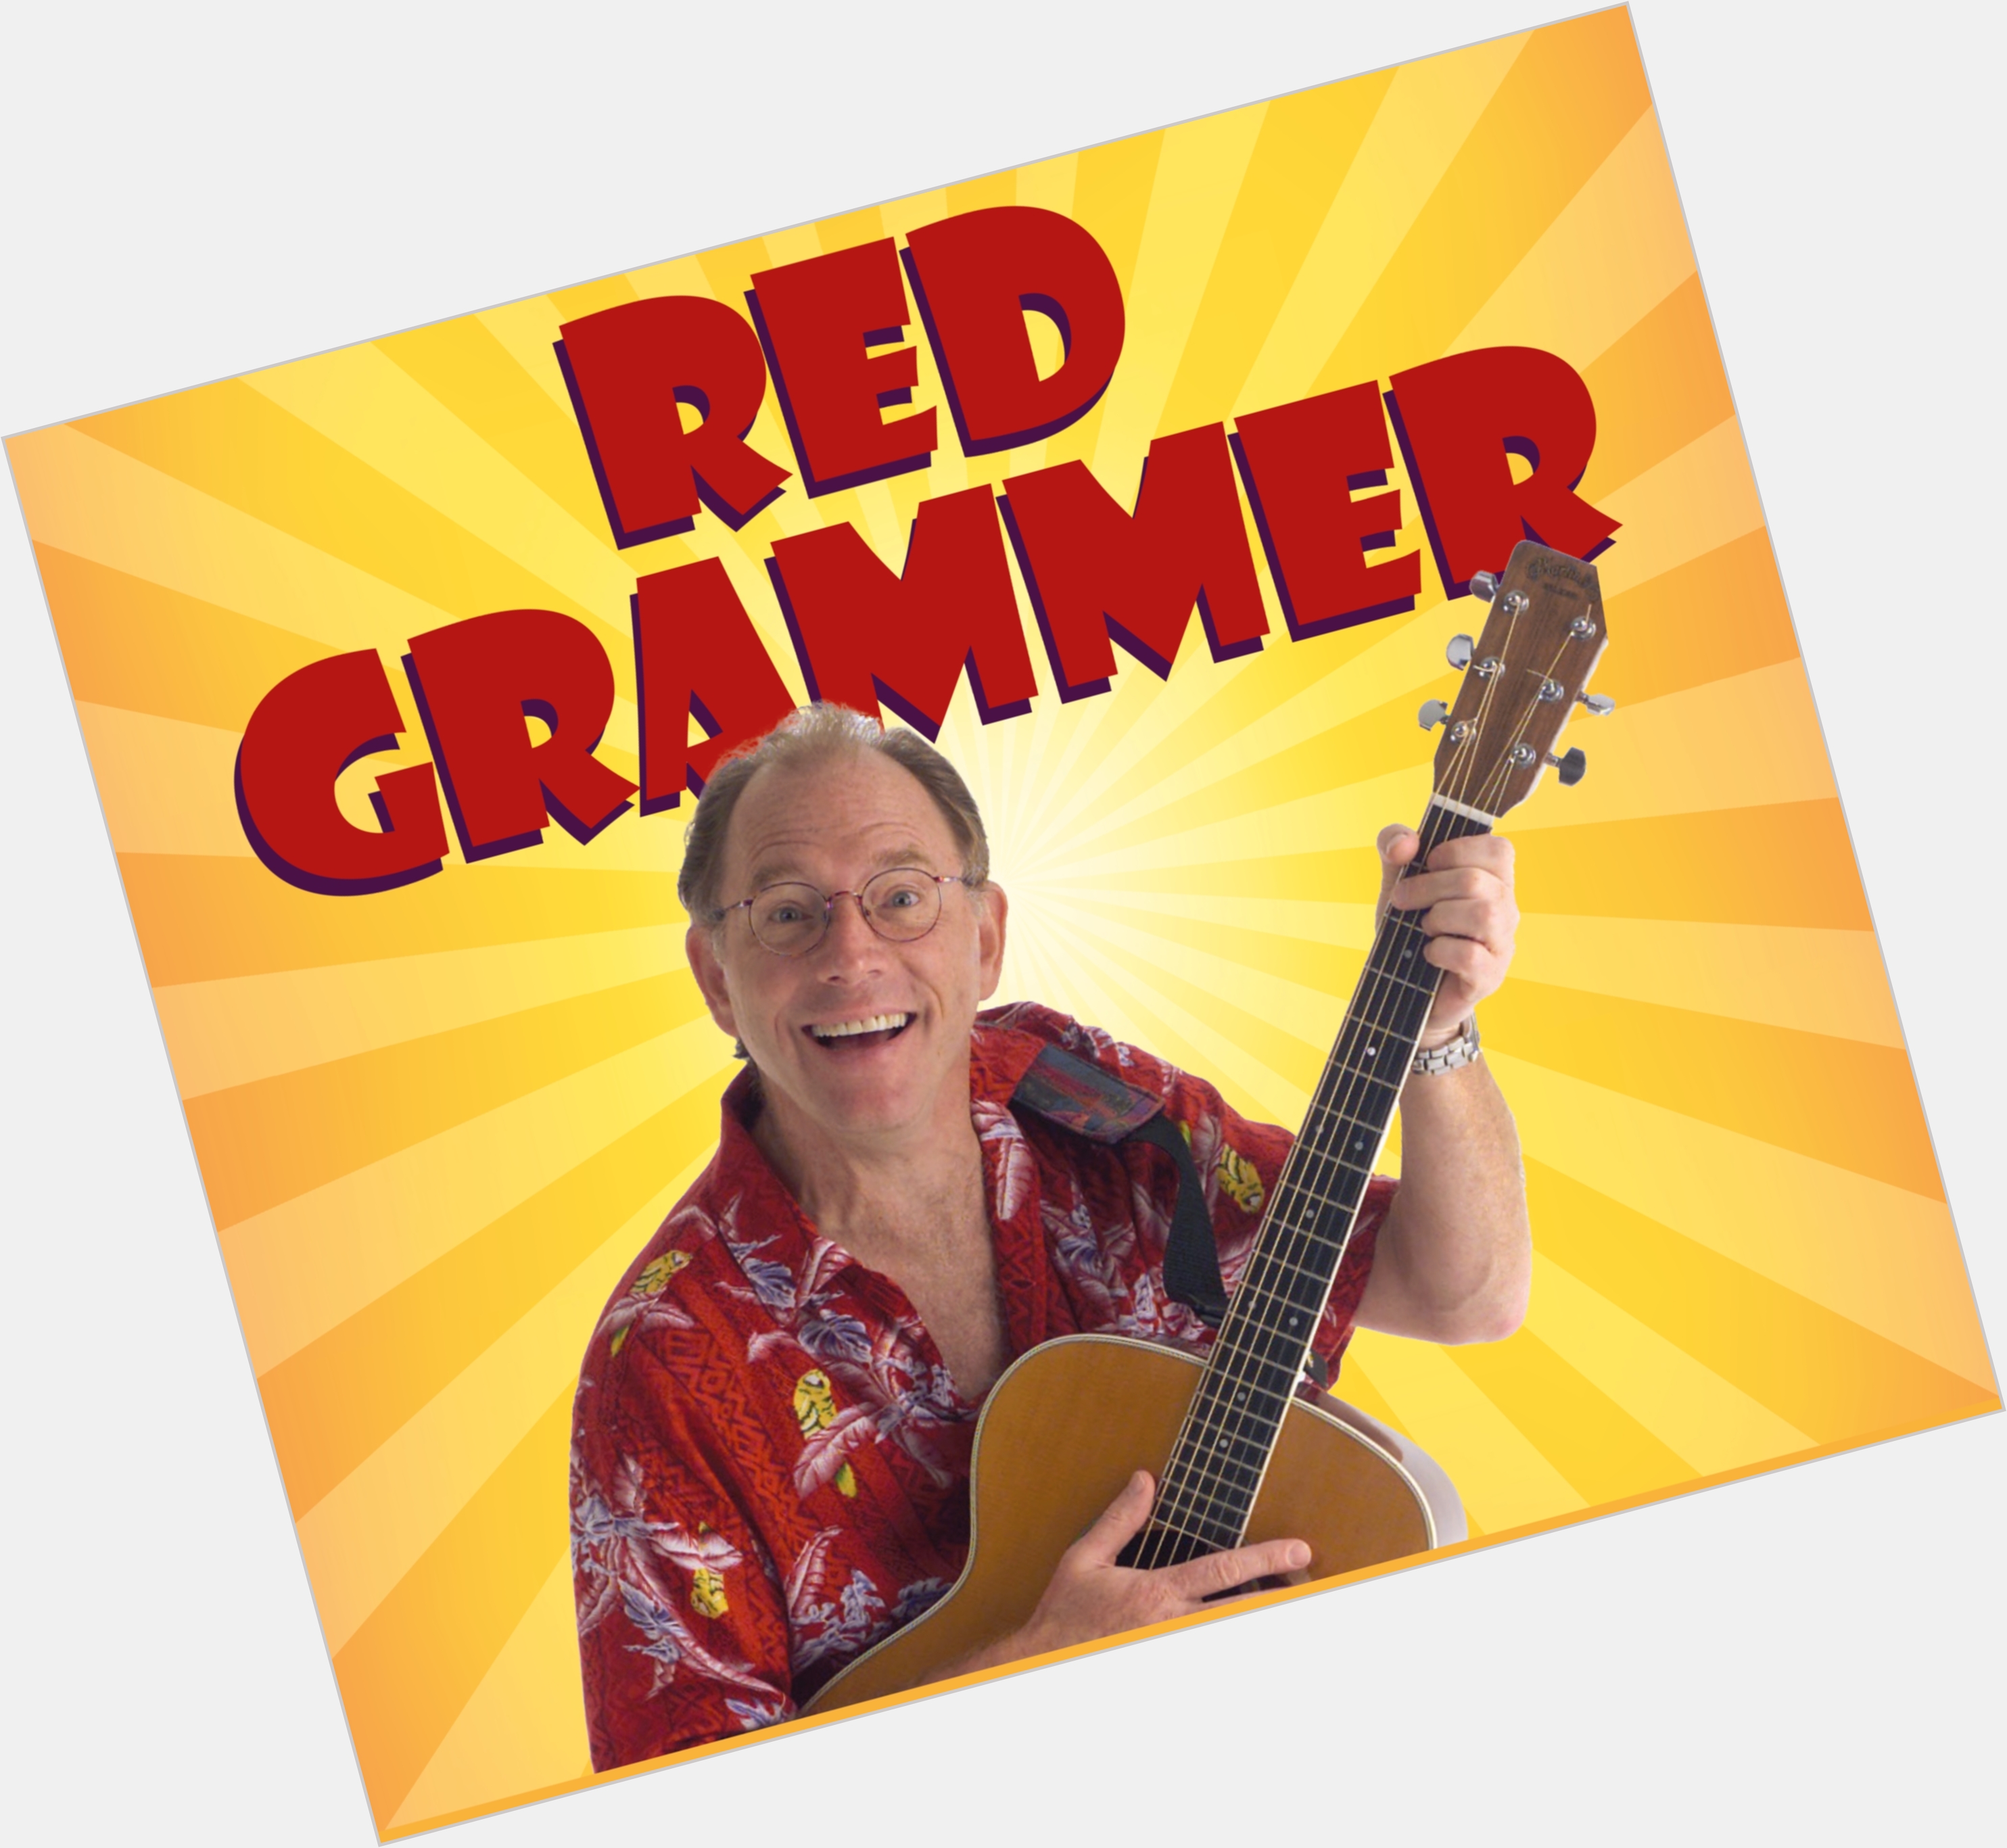 Red Grammer new pic 1